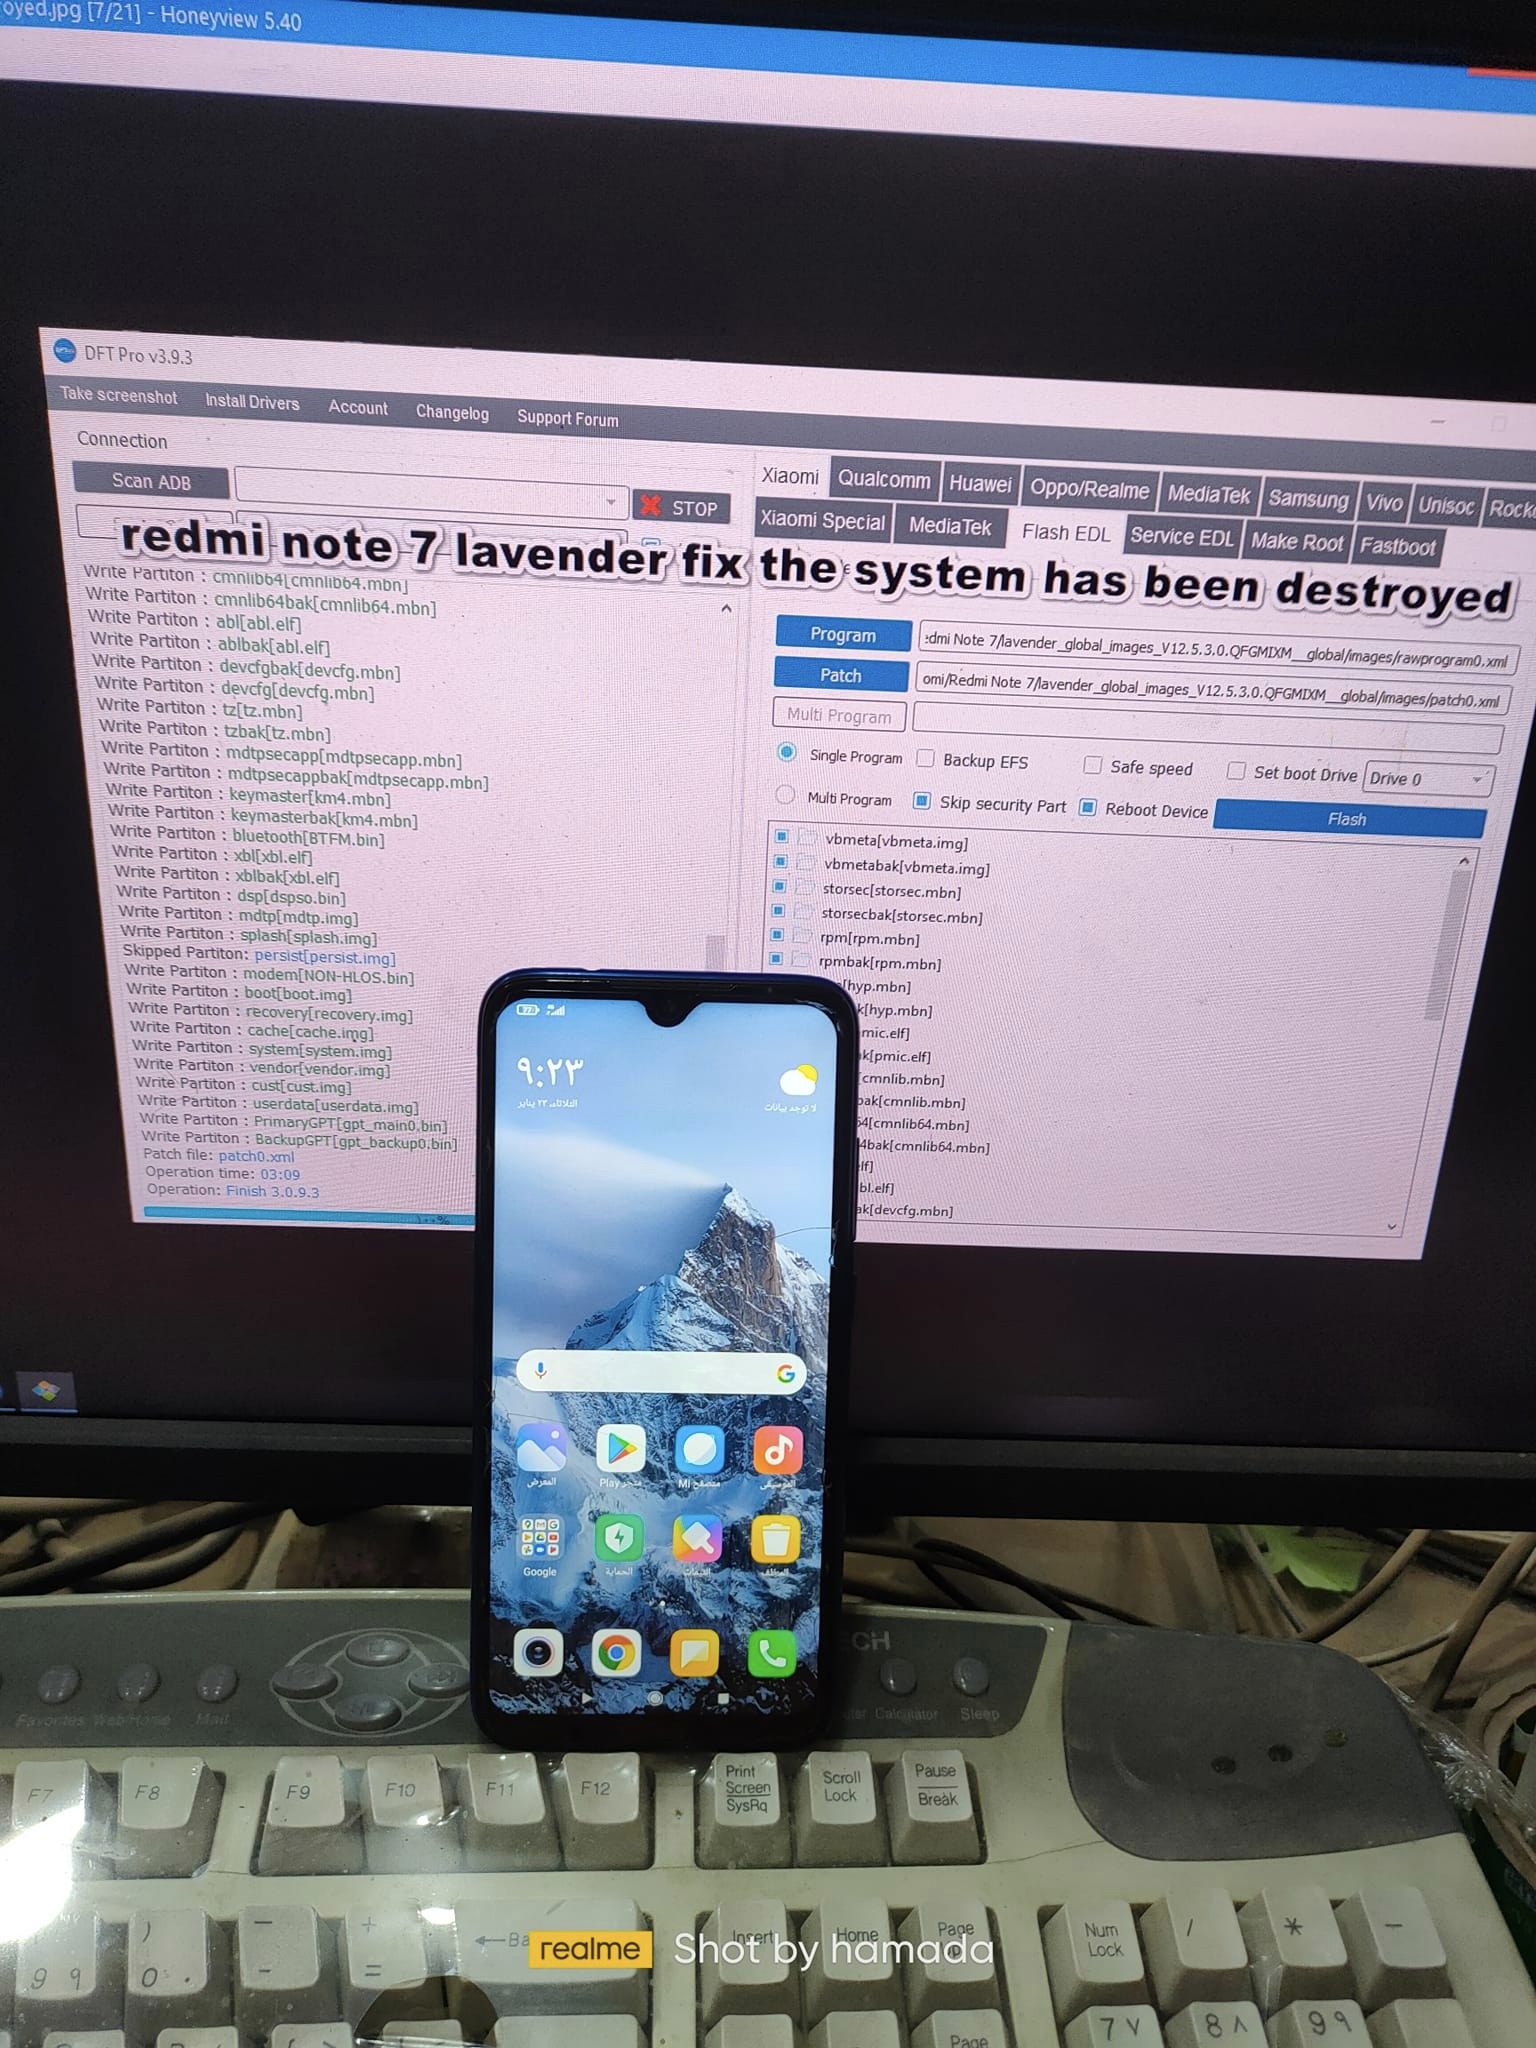 redmi note 7 lavender fix the system has been destroyed